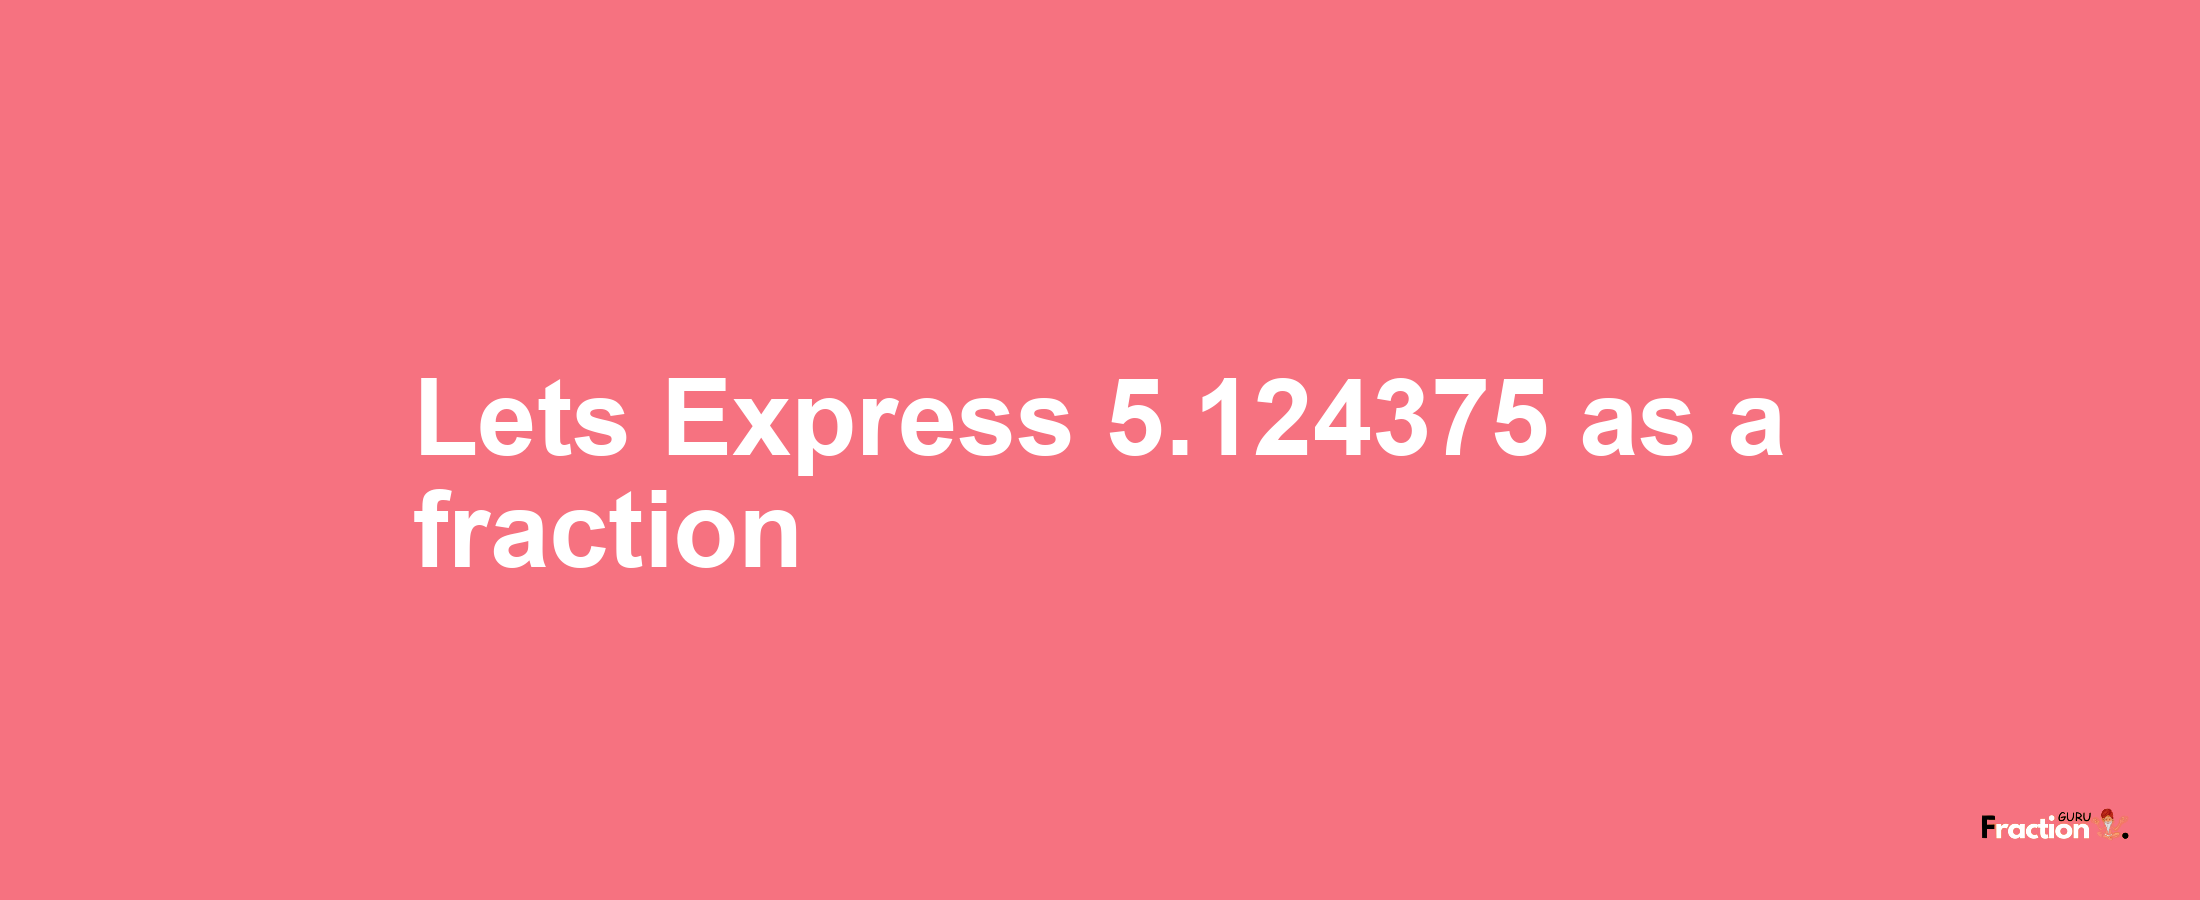 Lets Express 5.124375 as afraction